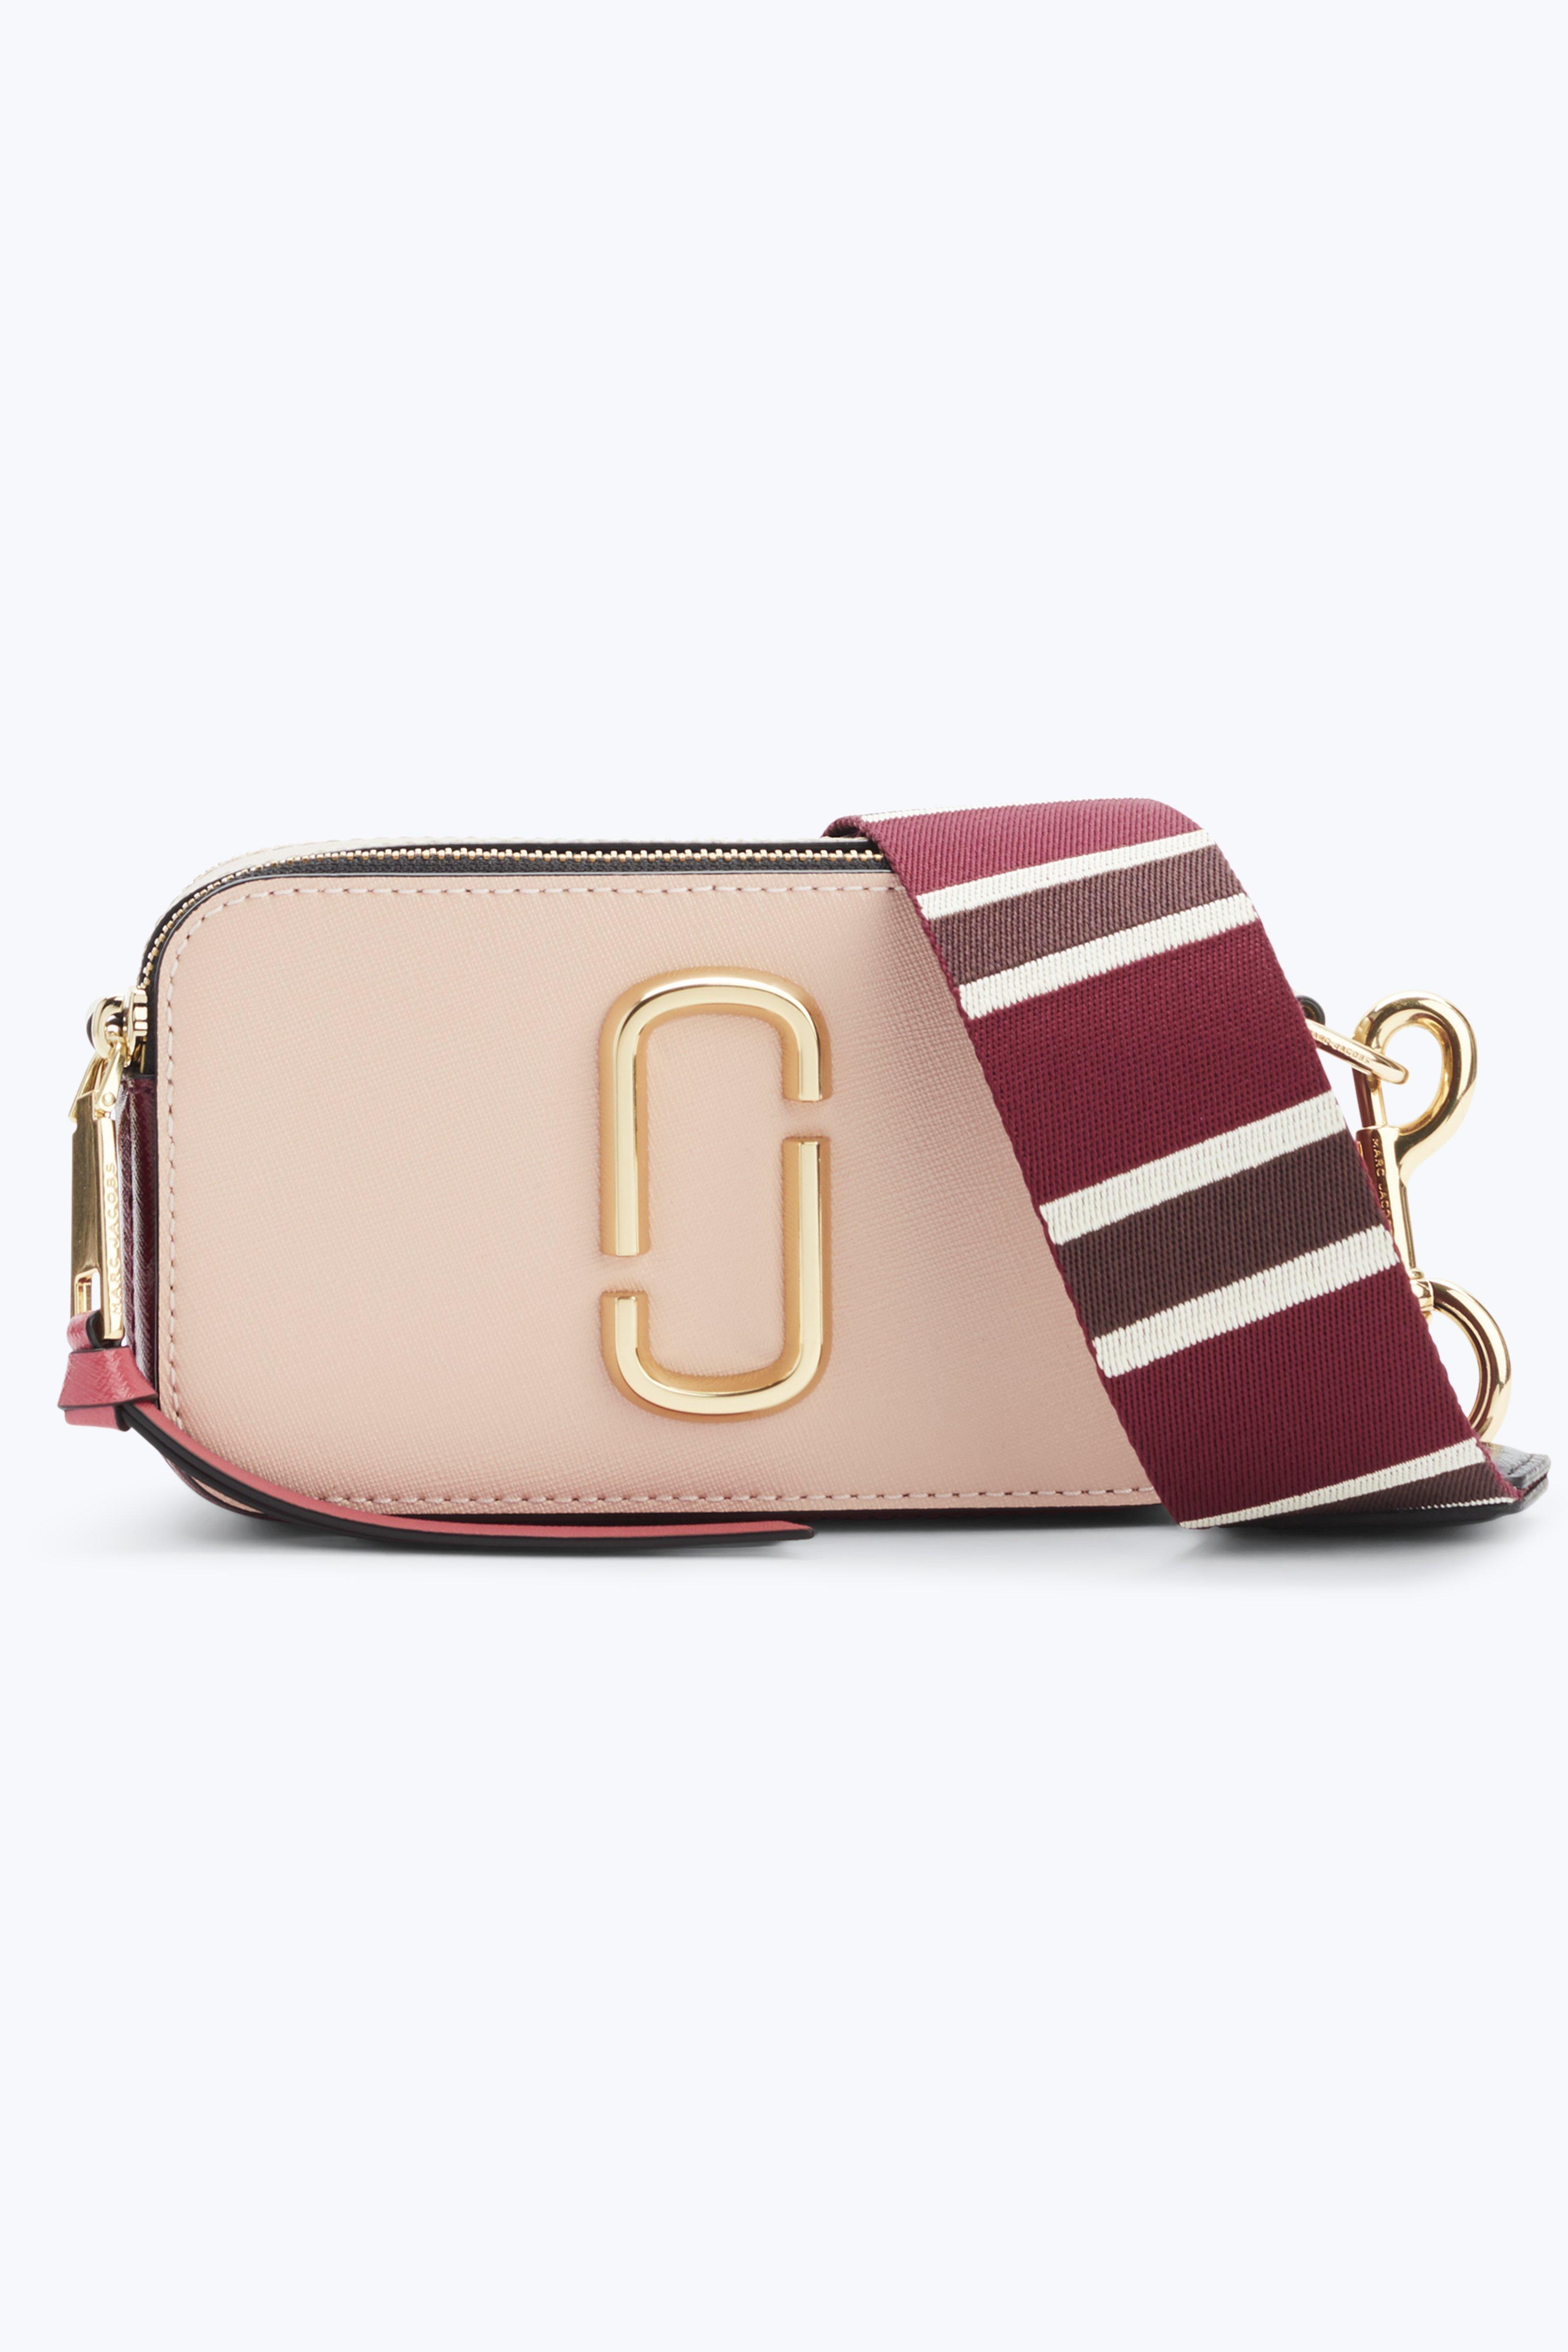 Marc Jacobs Snapshot Leather Camera Bag In Rose Multi | ModeSens